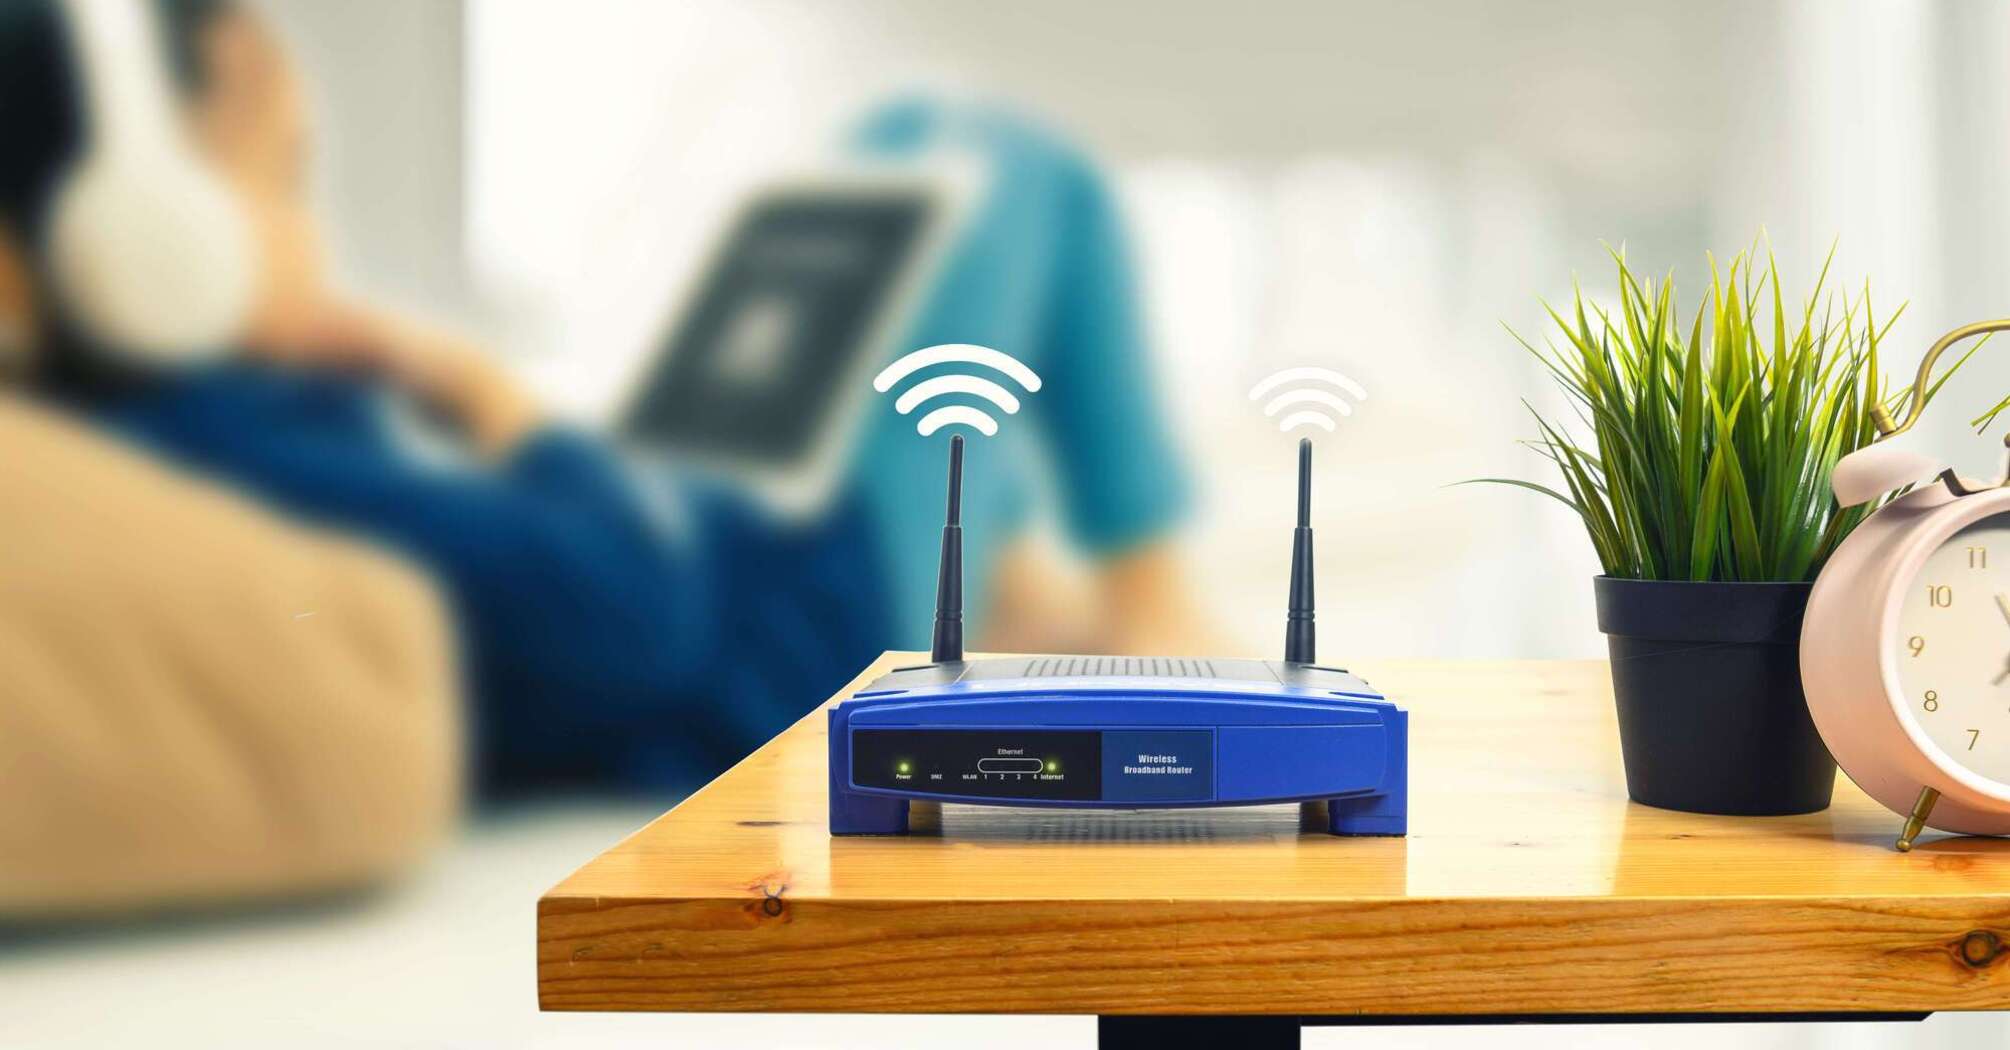 How to choose a router